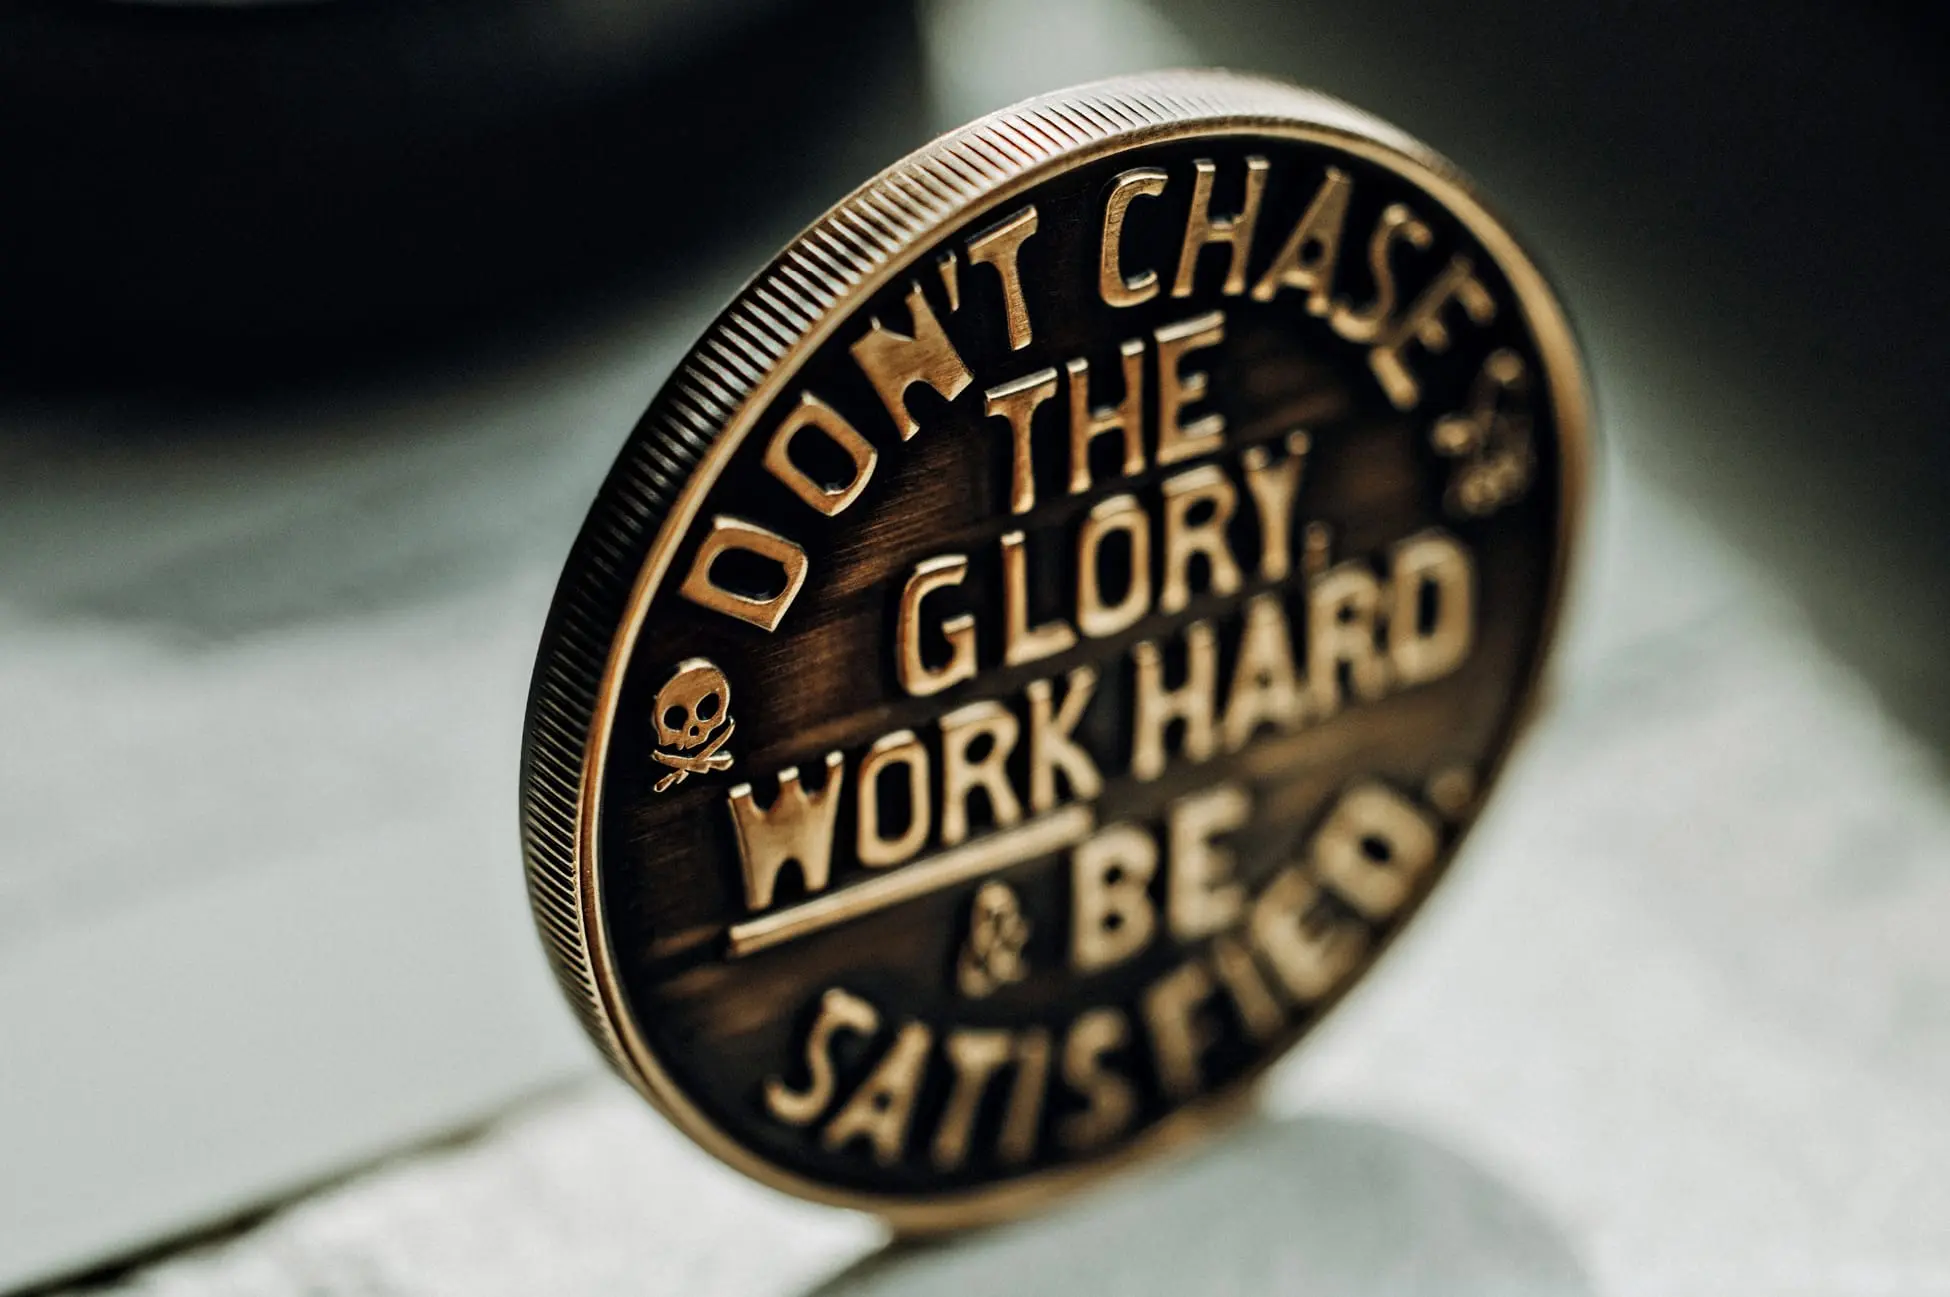 Don't Chase the Glory, Work Hard and Be Satisfied Coin